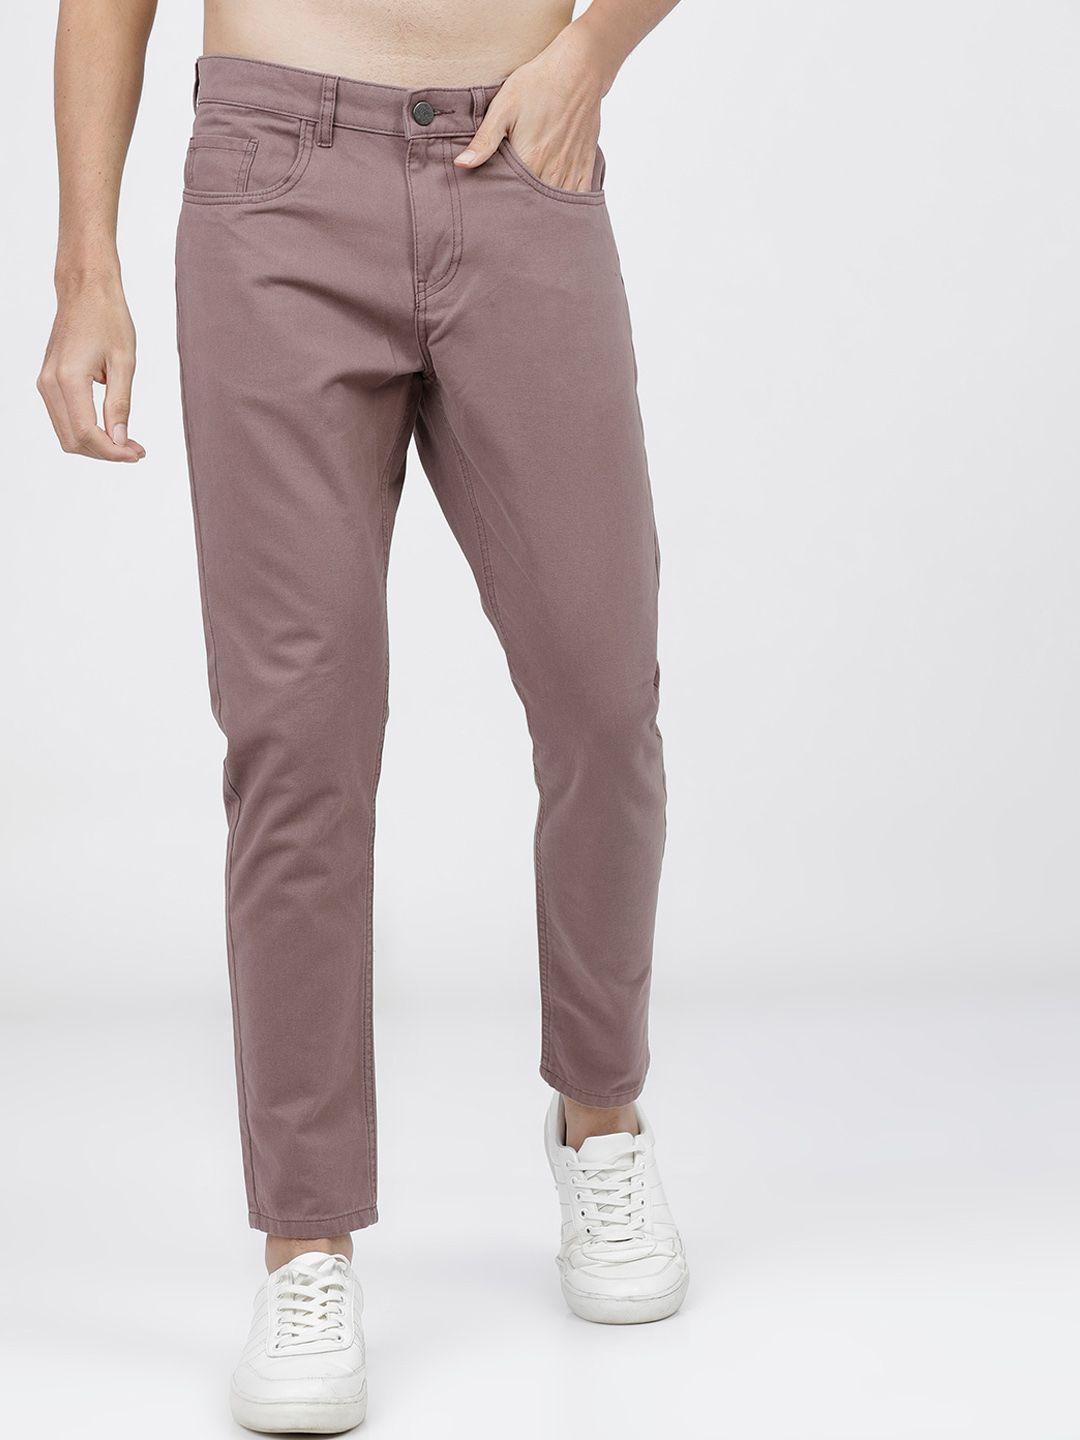 ketch men rose tapered fit chinos trousers